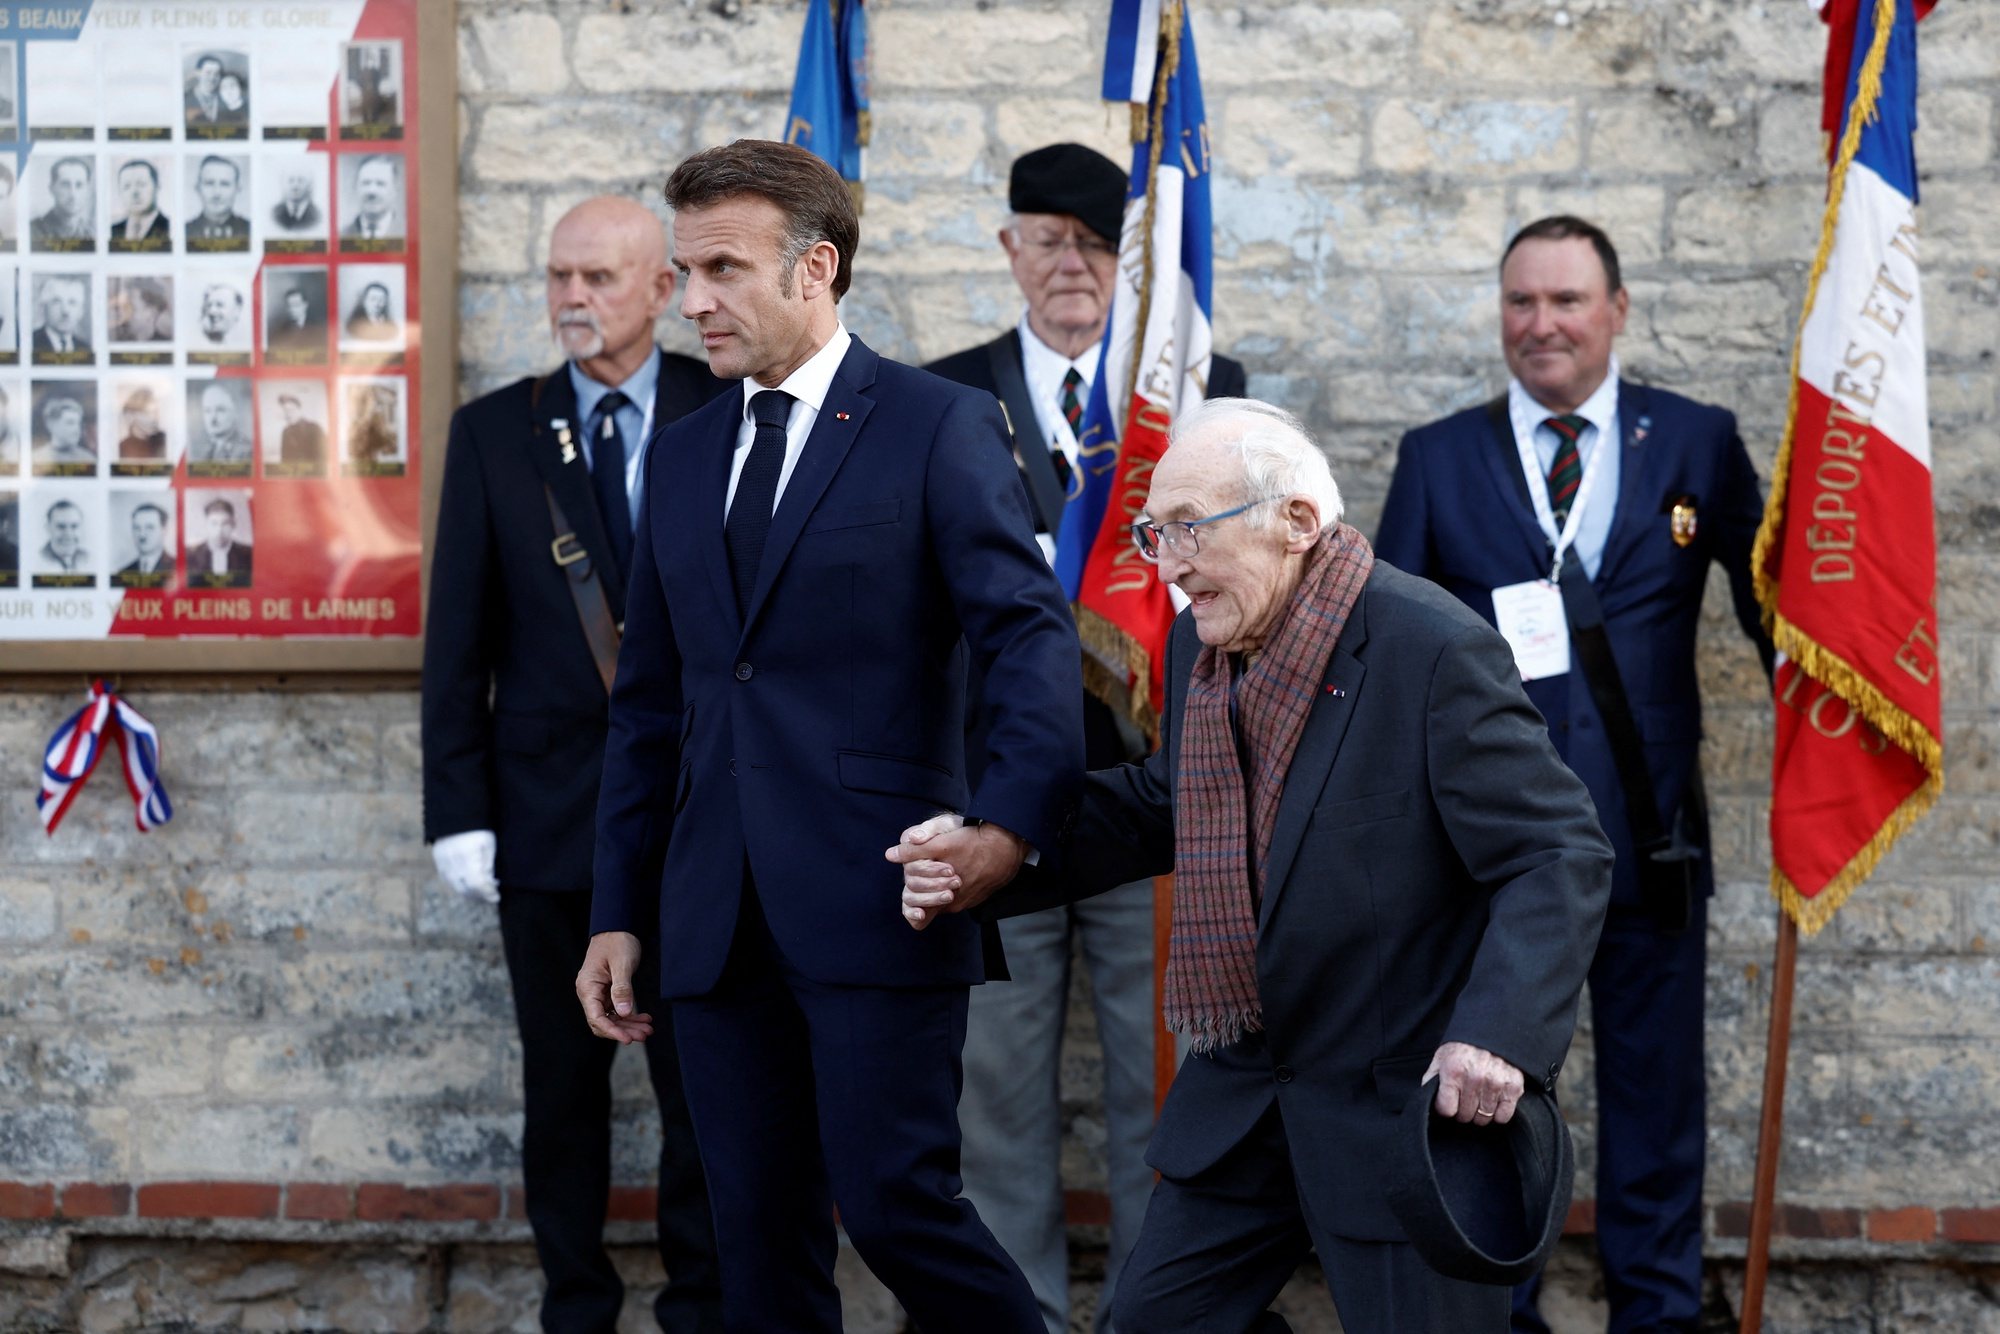 epa11391884 French President Emmanuel Macron holds the hand of Bernard Duval, a survivor of the 1944 Caen prison massacre, during a ceremony at the Caen prison to pay tribute to French Resistance fighters in Caen, north-western France, 05 June 2024. French President Macron launched the commemoration of the 80th anniversary of D-Day, the Normandy landings of Western Allied forces on 06 June 1944 that initiated the liberation of western Europe during World War II, by paying tribute to the French Resistance fighters.  EPA/BENOIT TESSIER / POOL  MAXPPP OUT